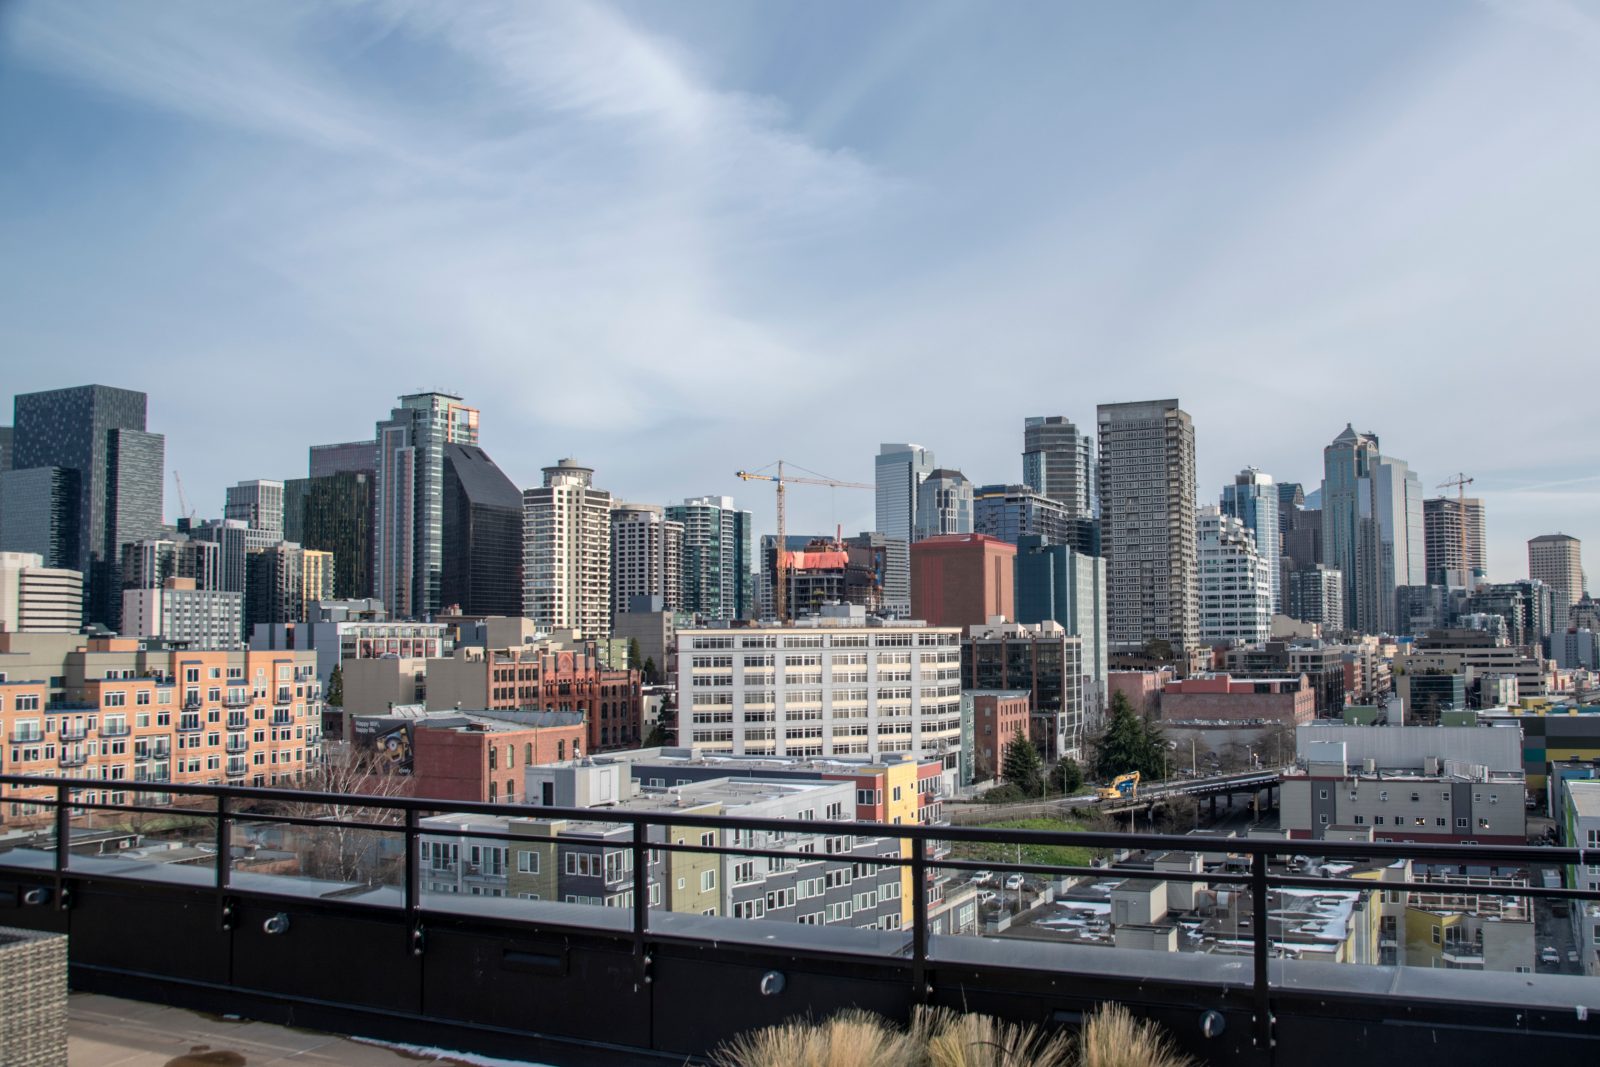 downtown-seattle-skyline-from-a-condo-building-roo-2021-08-30-09-45-25-utc